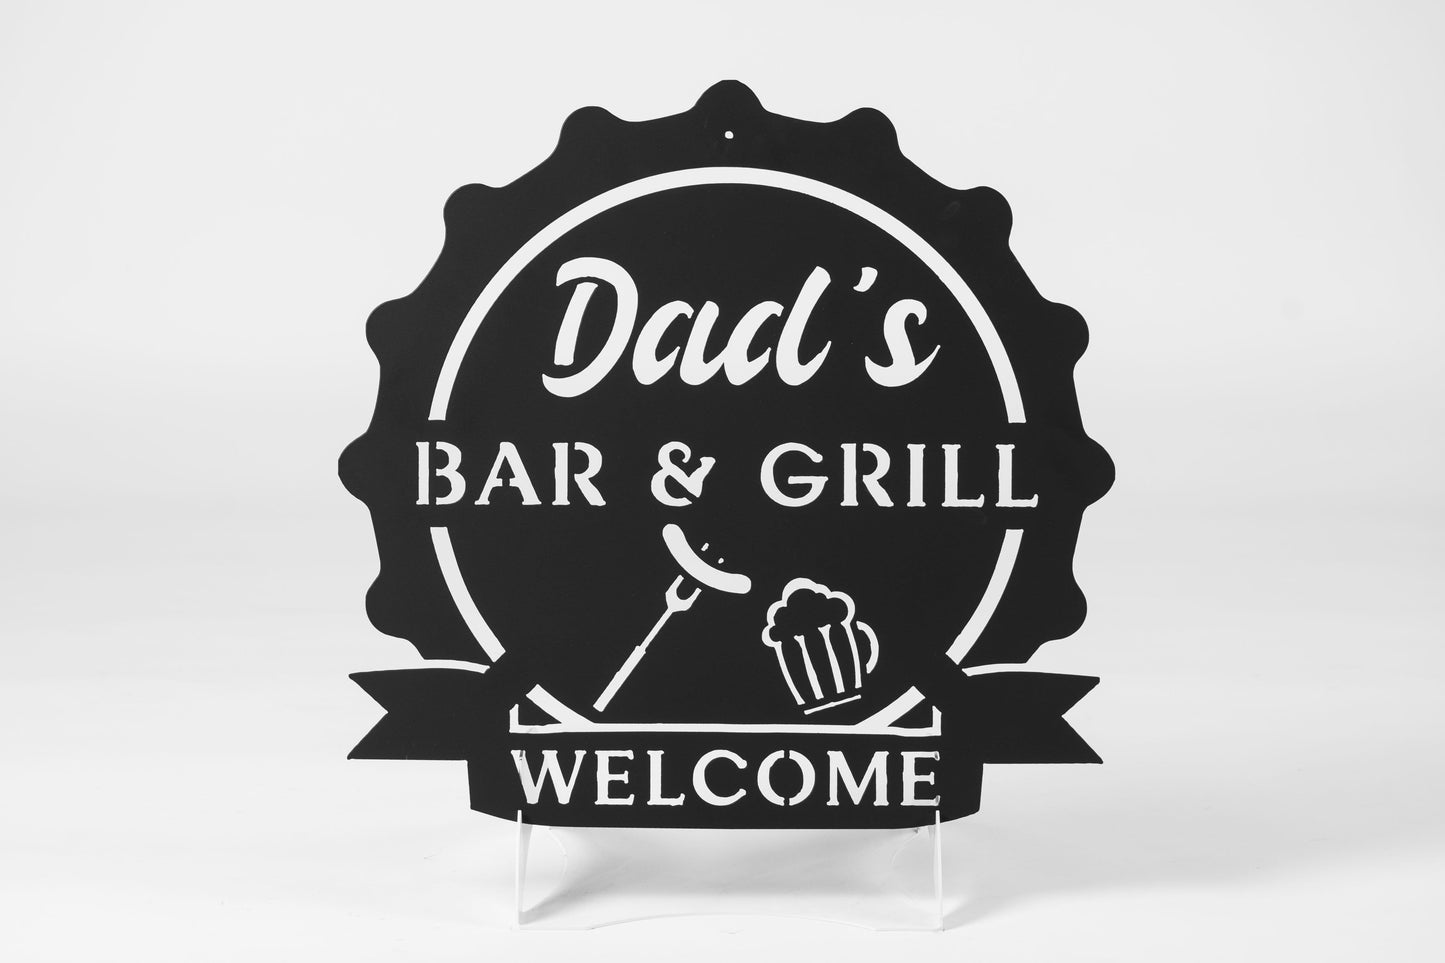 Dads Bar and Grill